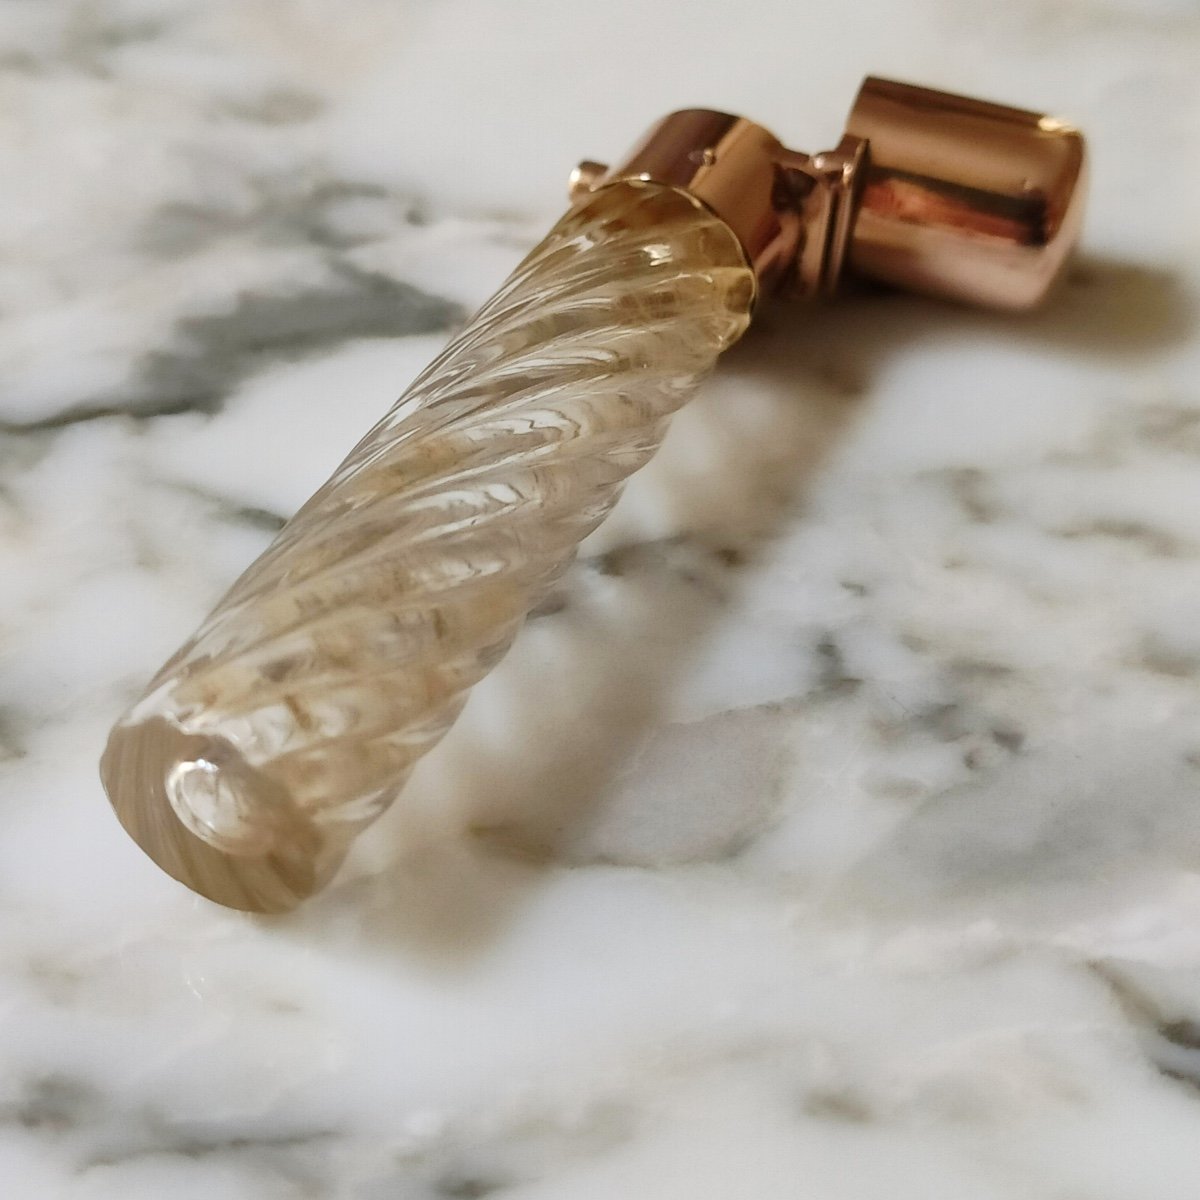 Charming Small Bag Or Pocket Bottle For Perfume, In Crystal And 18k Gold. Salt Salts-photo-1